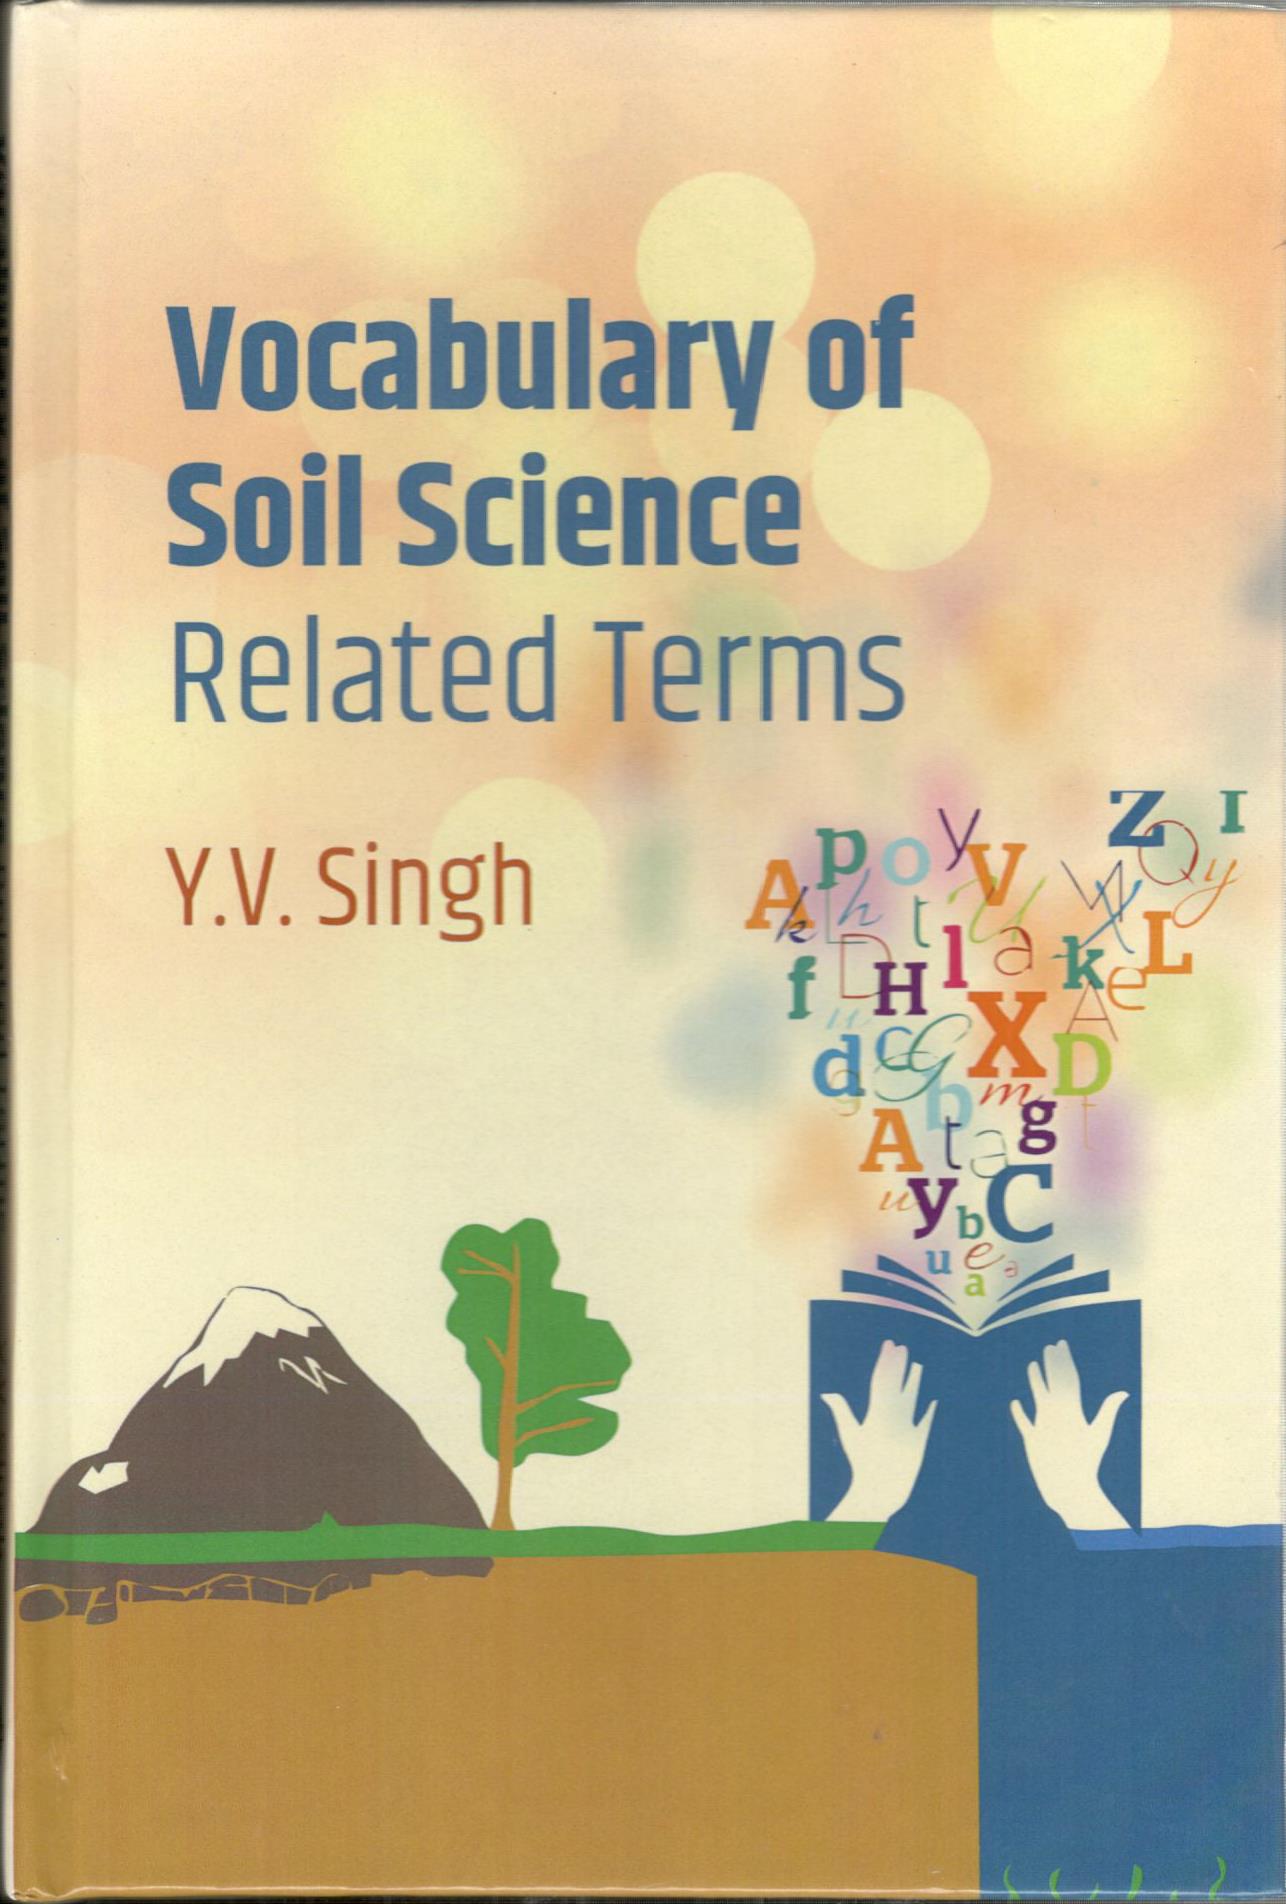 Vocabulary of Soil Science Related Terms